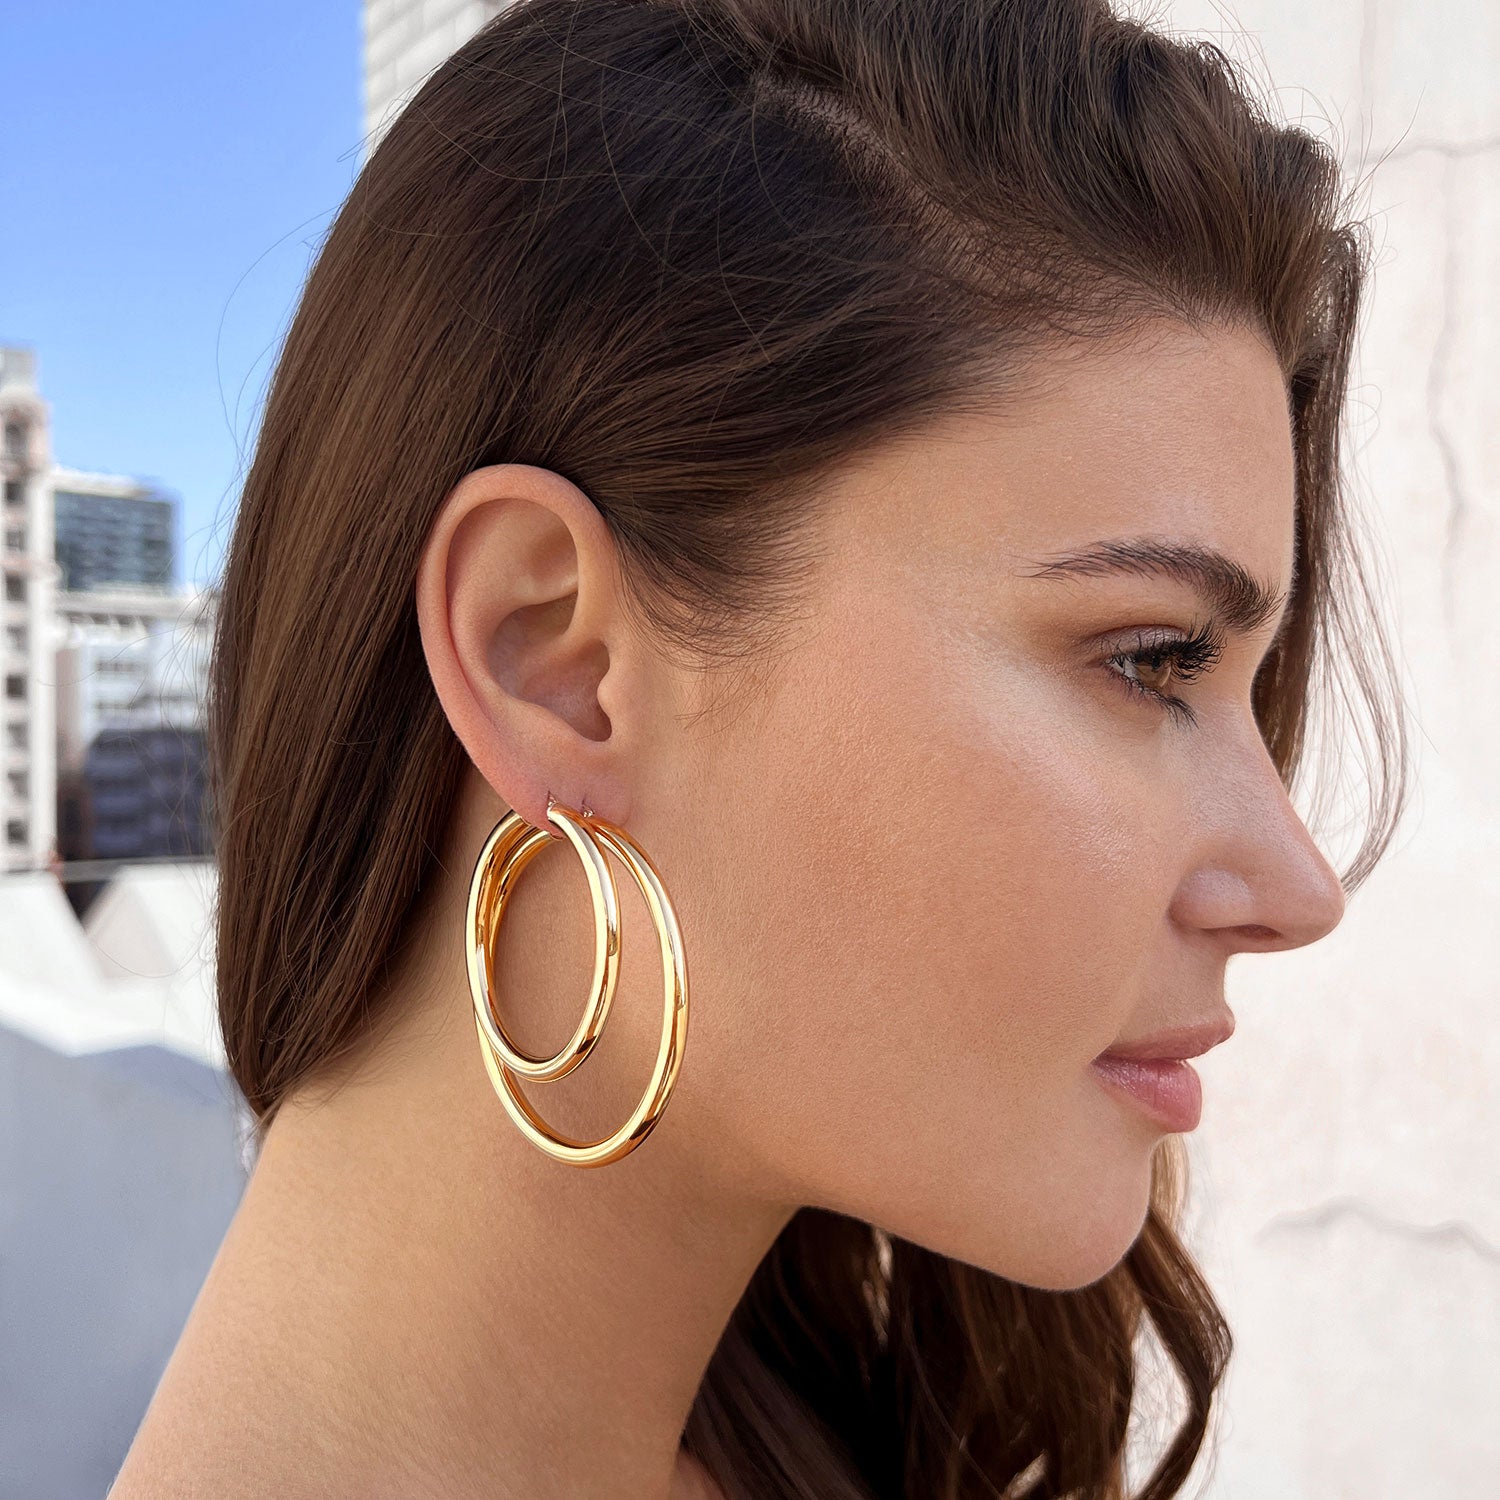 Hoop earrings criticised as cultural appropriation | The Independent | The  Independent